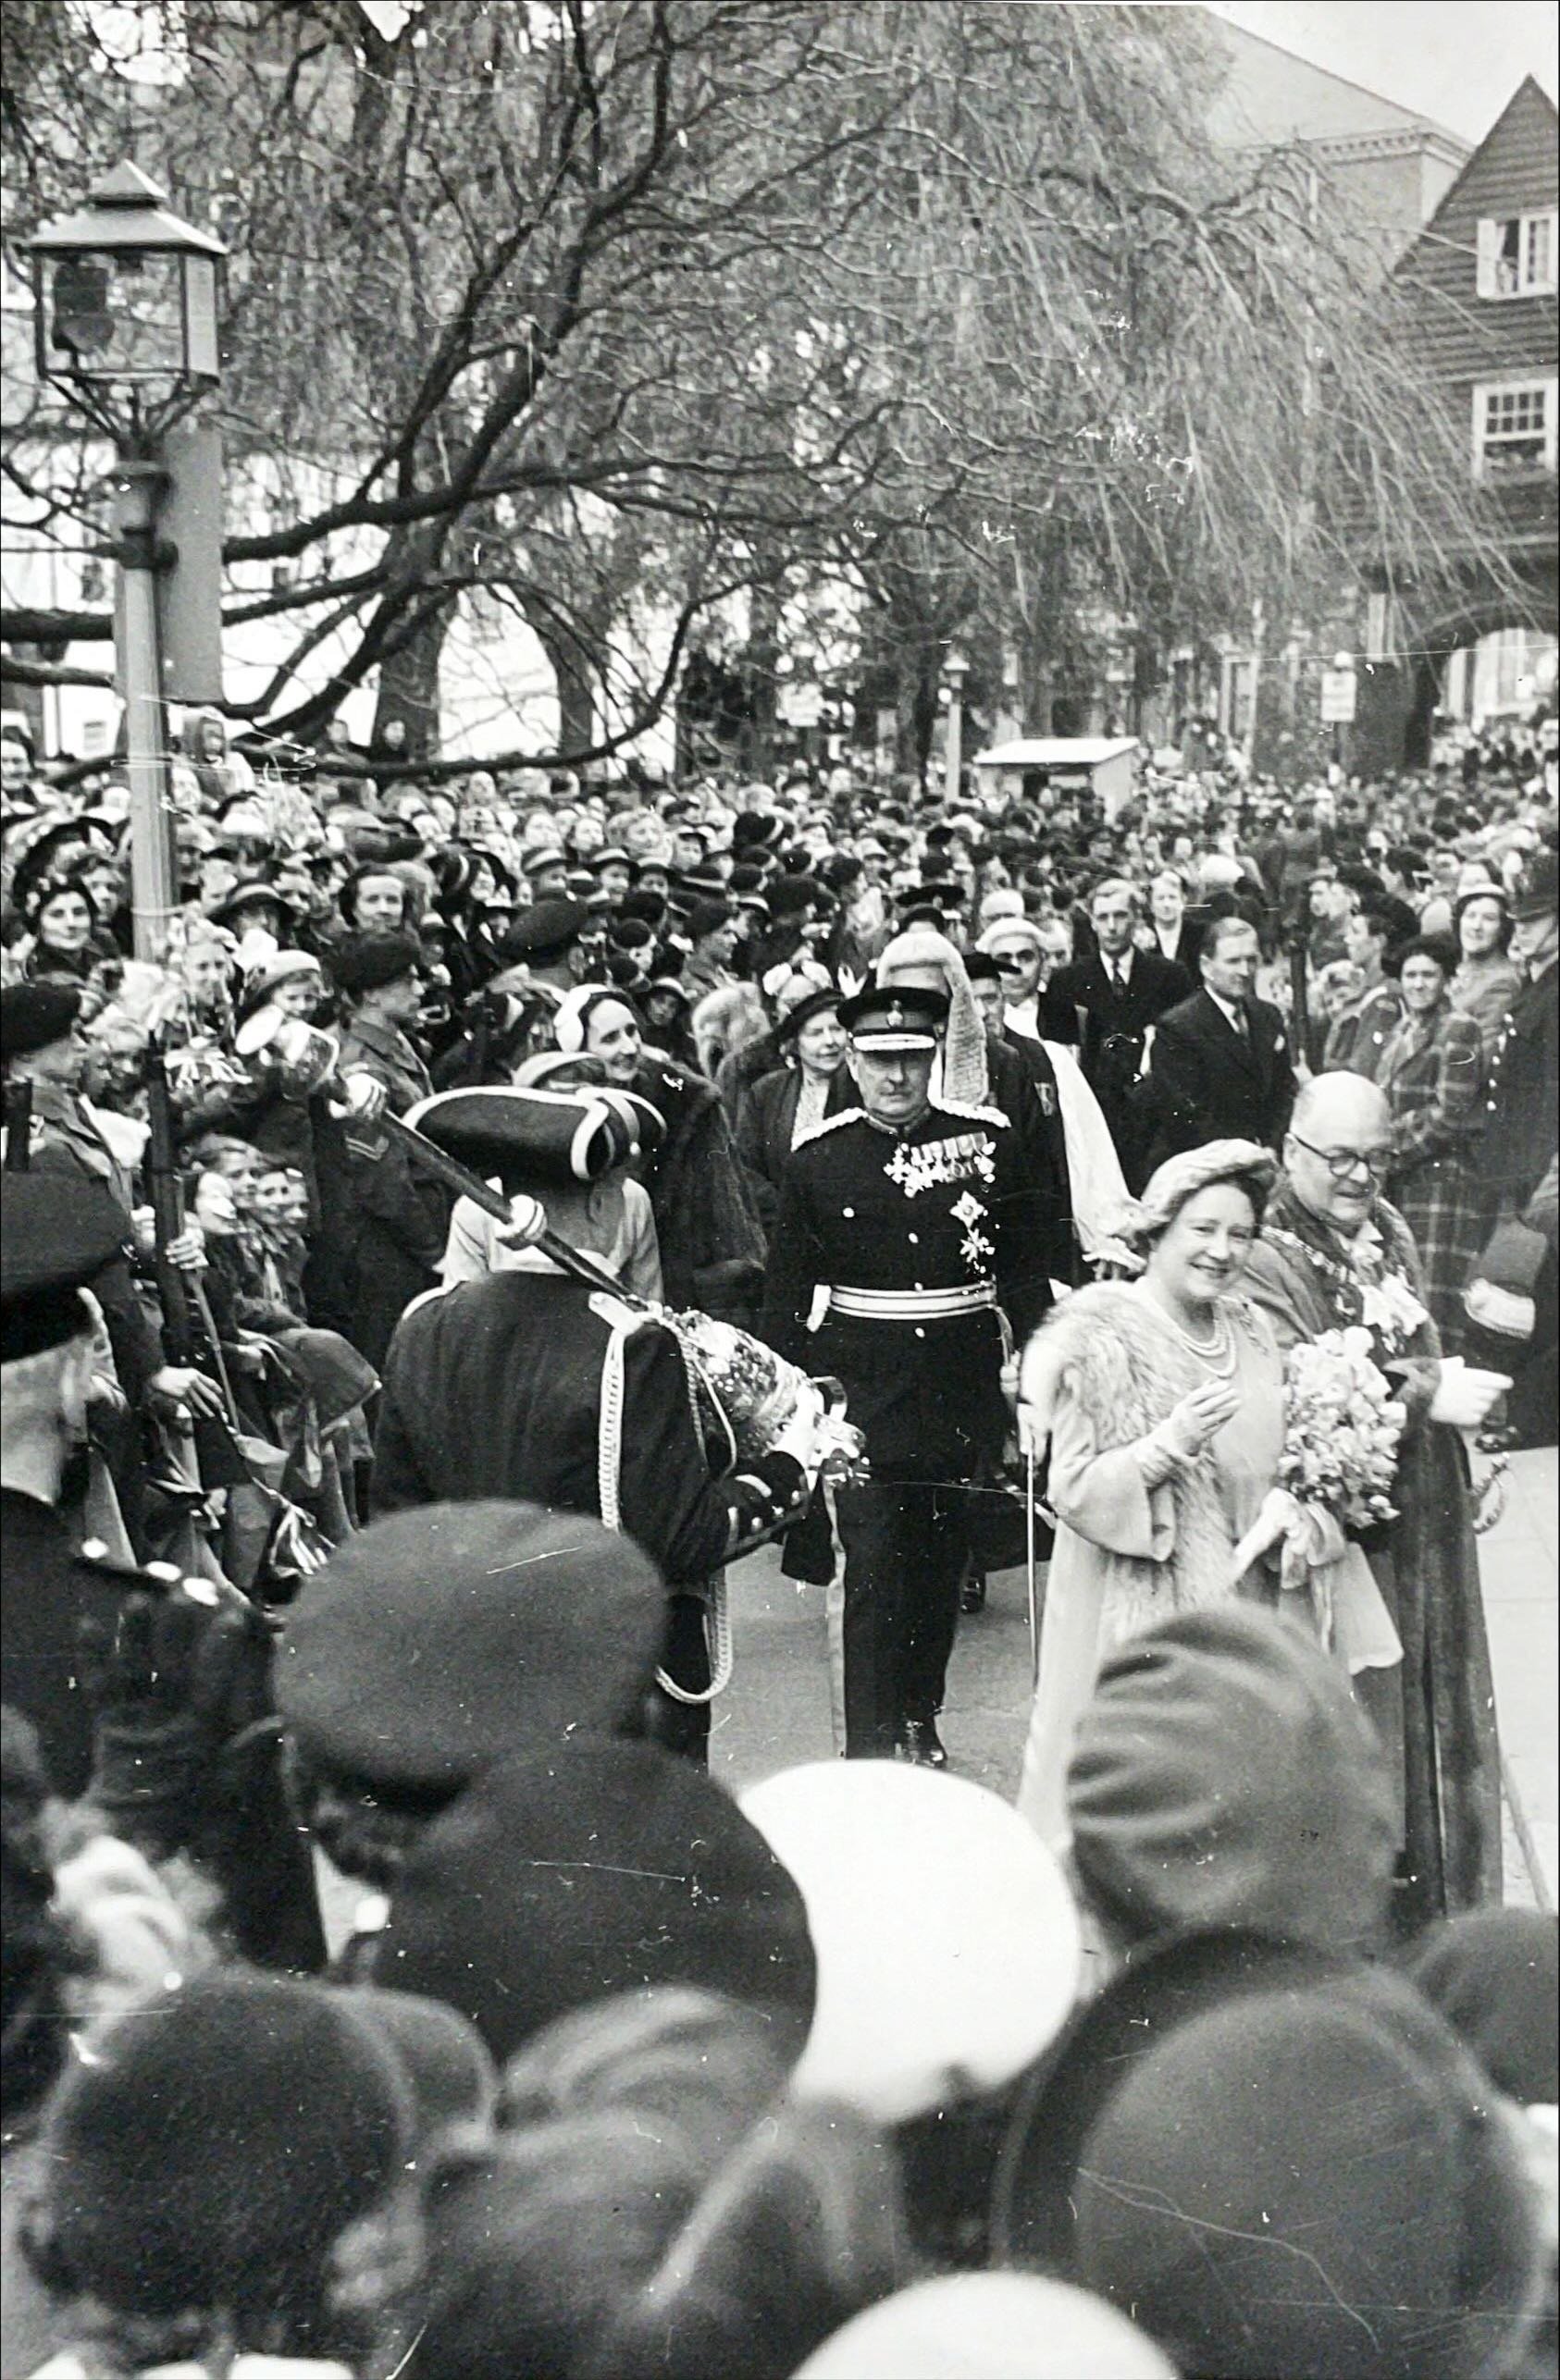 Visit by Queen Elizabeth the Queen Mother for the 27th Jubilee of the Diocese Celebrations, May 1954 (2 of 3)